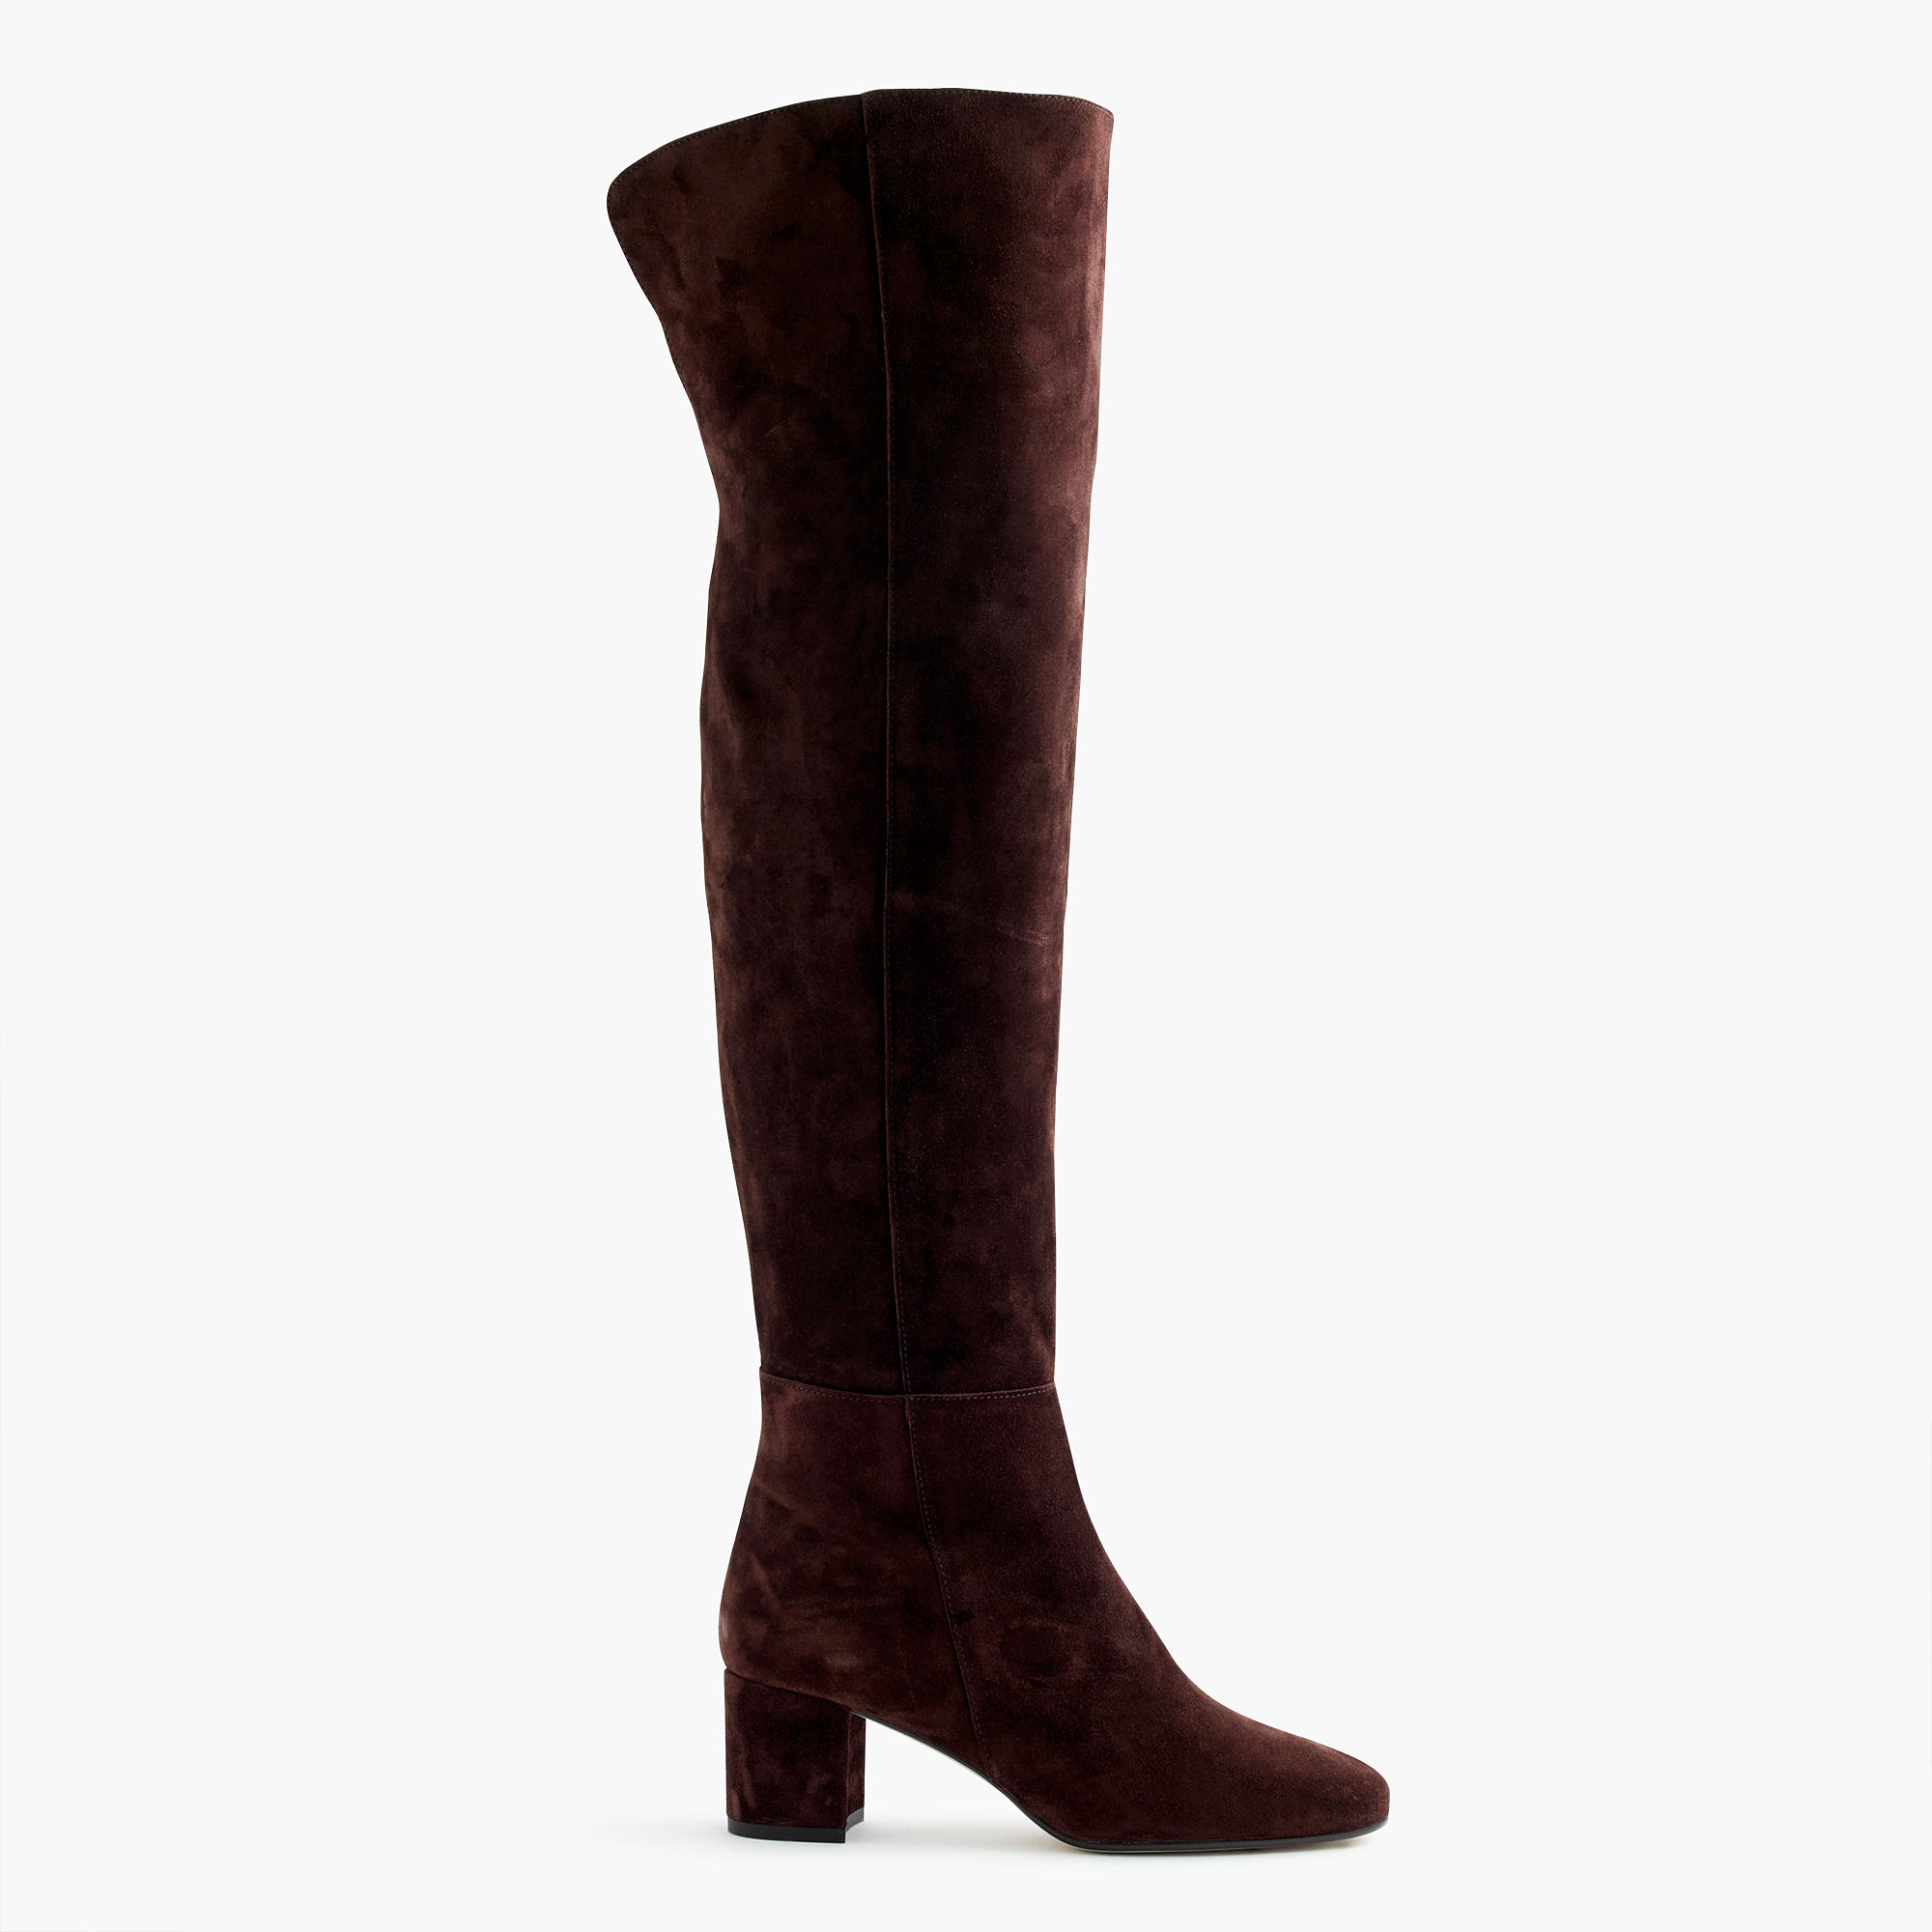 Suede Over-The-Knee Boots : Women's Boots | J.Crew